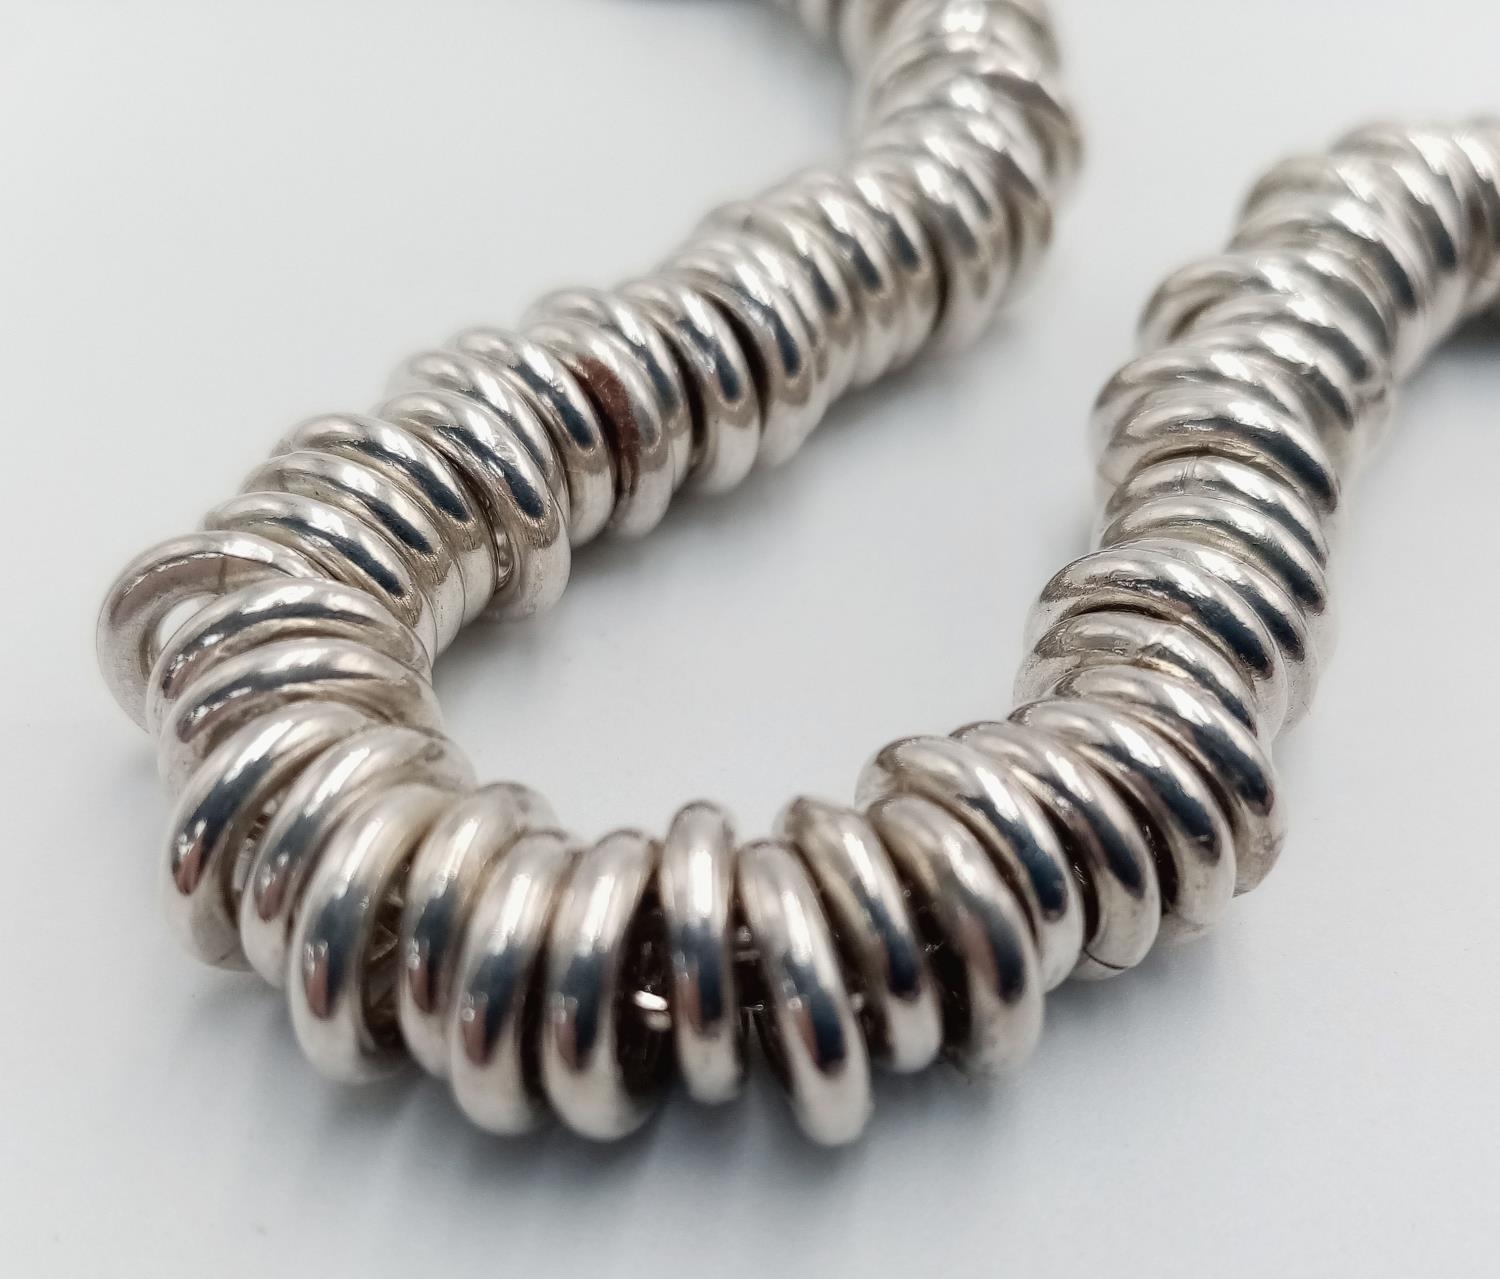 A STERLING SILVER RING LINKED BRACELET WITH T BAR CLASP 51.7G , APPROX 20CM. SC 9082 - Image 4 of 4